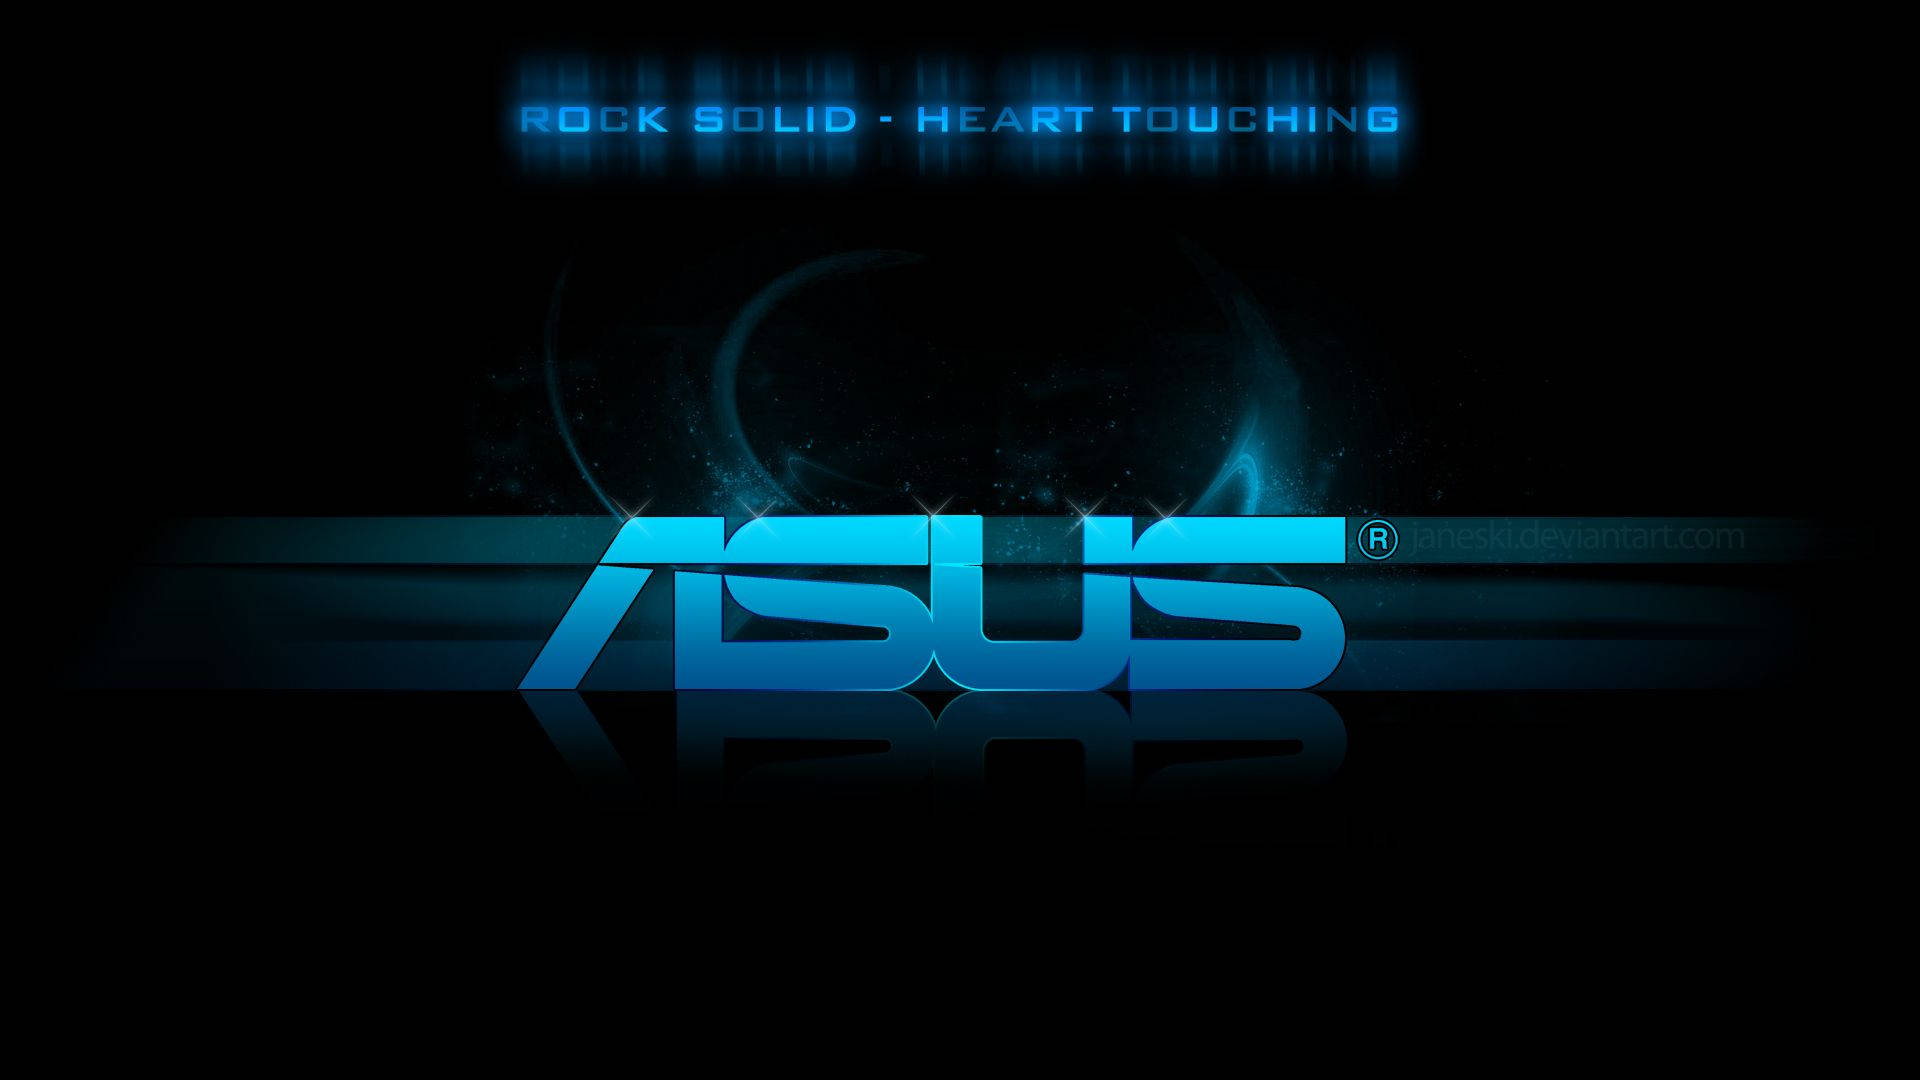 Asus 1920X1080 Wallpaper and Background Image